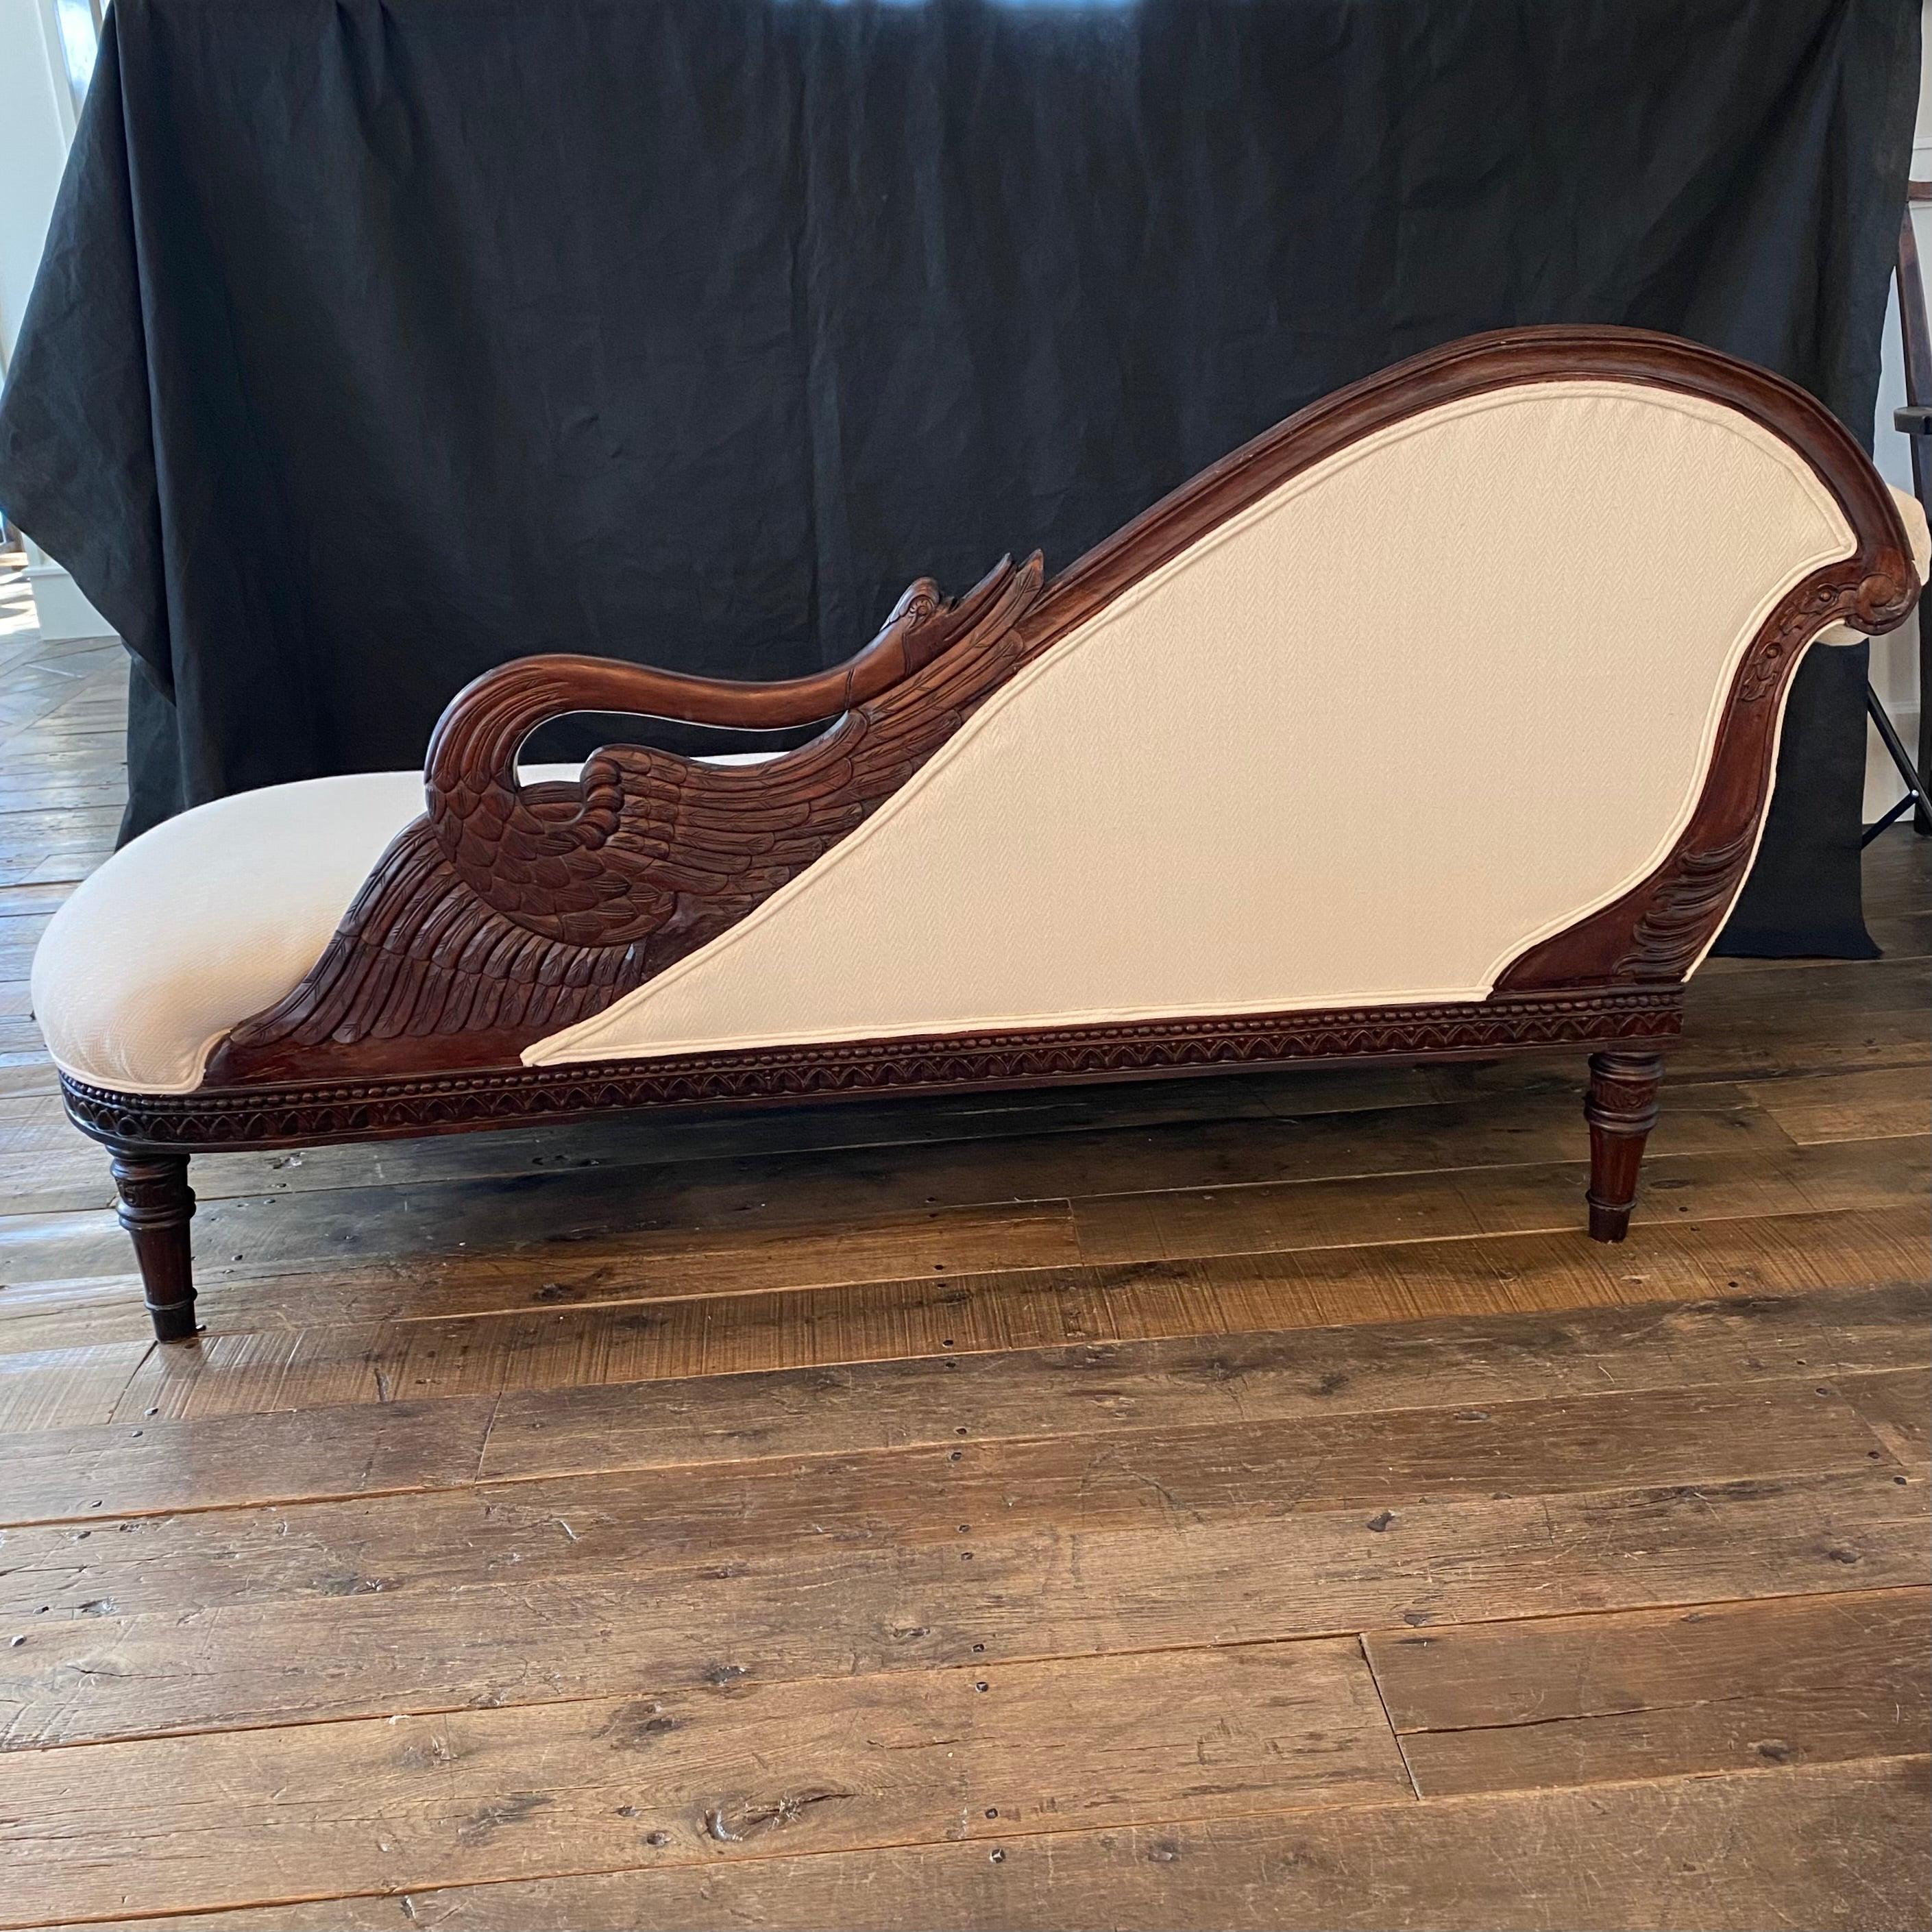 19th Century Neoclassical French Empire Swan Neck Chaise Longue Daybed 2